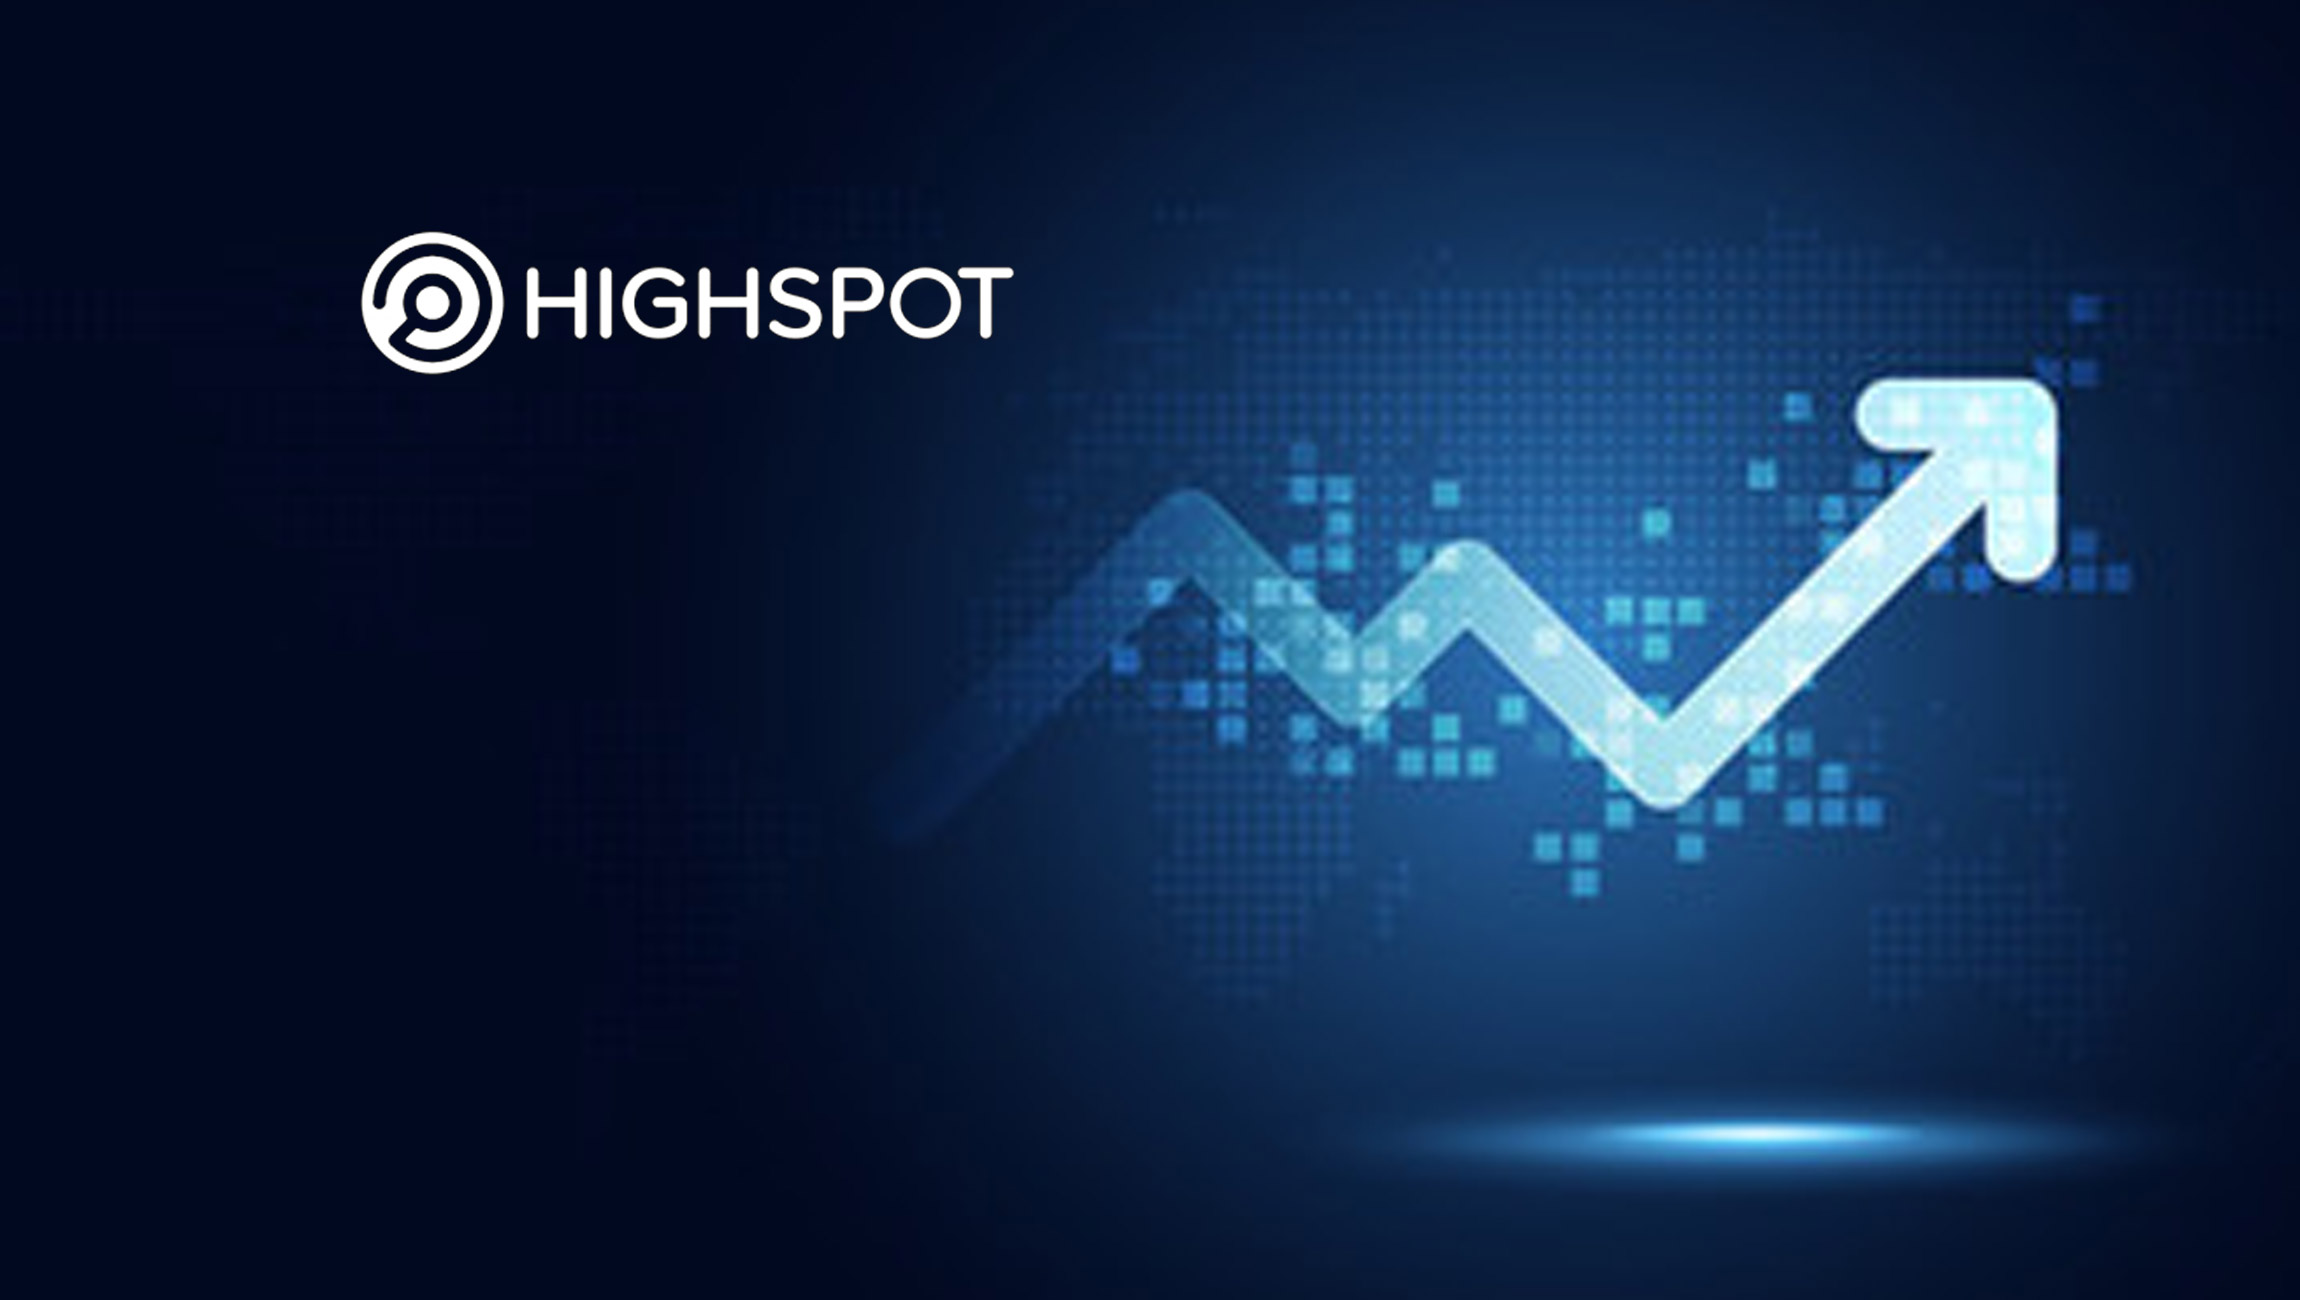 Highspot Closes $248 Million Series F Round to Accelerate Growth and Product Innovation